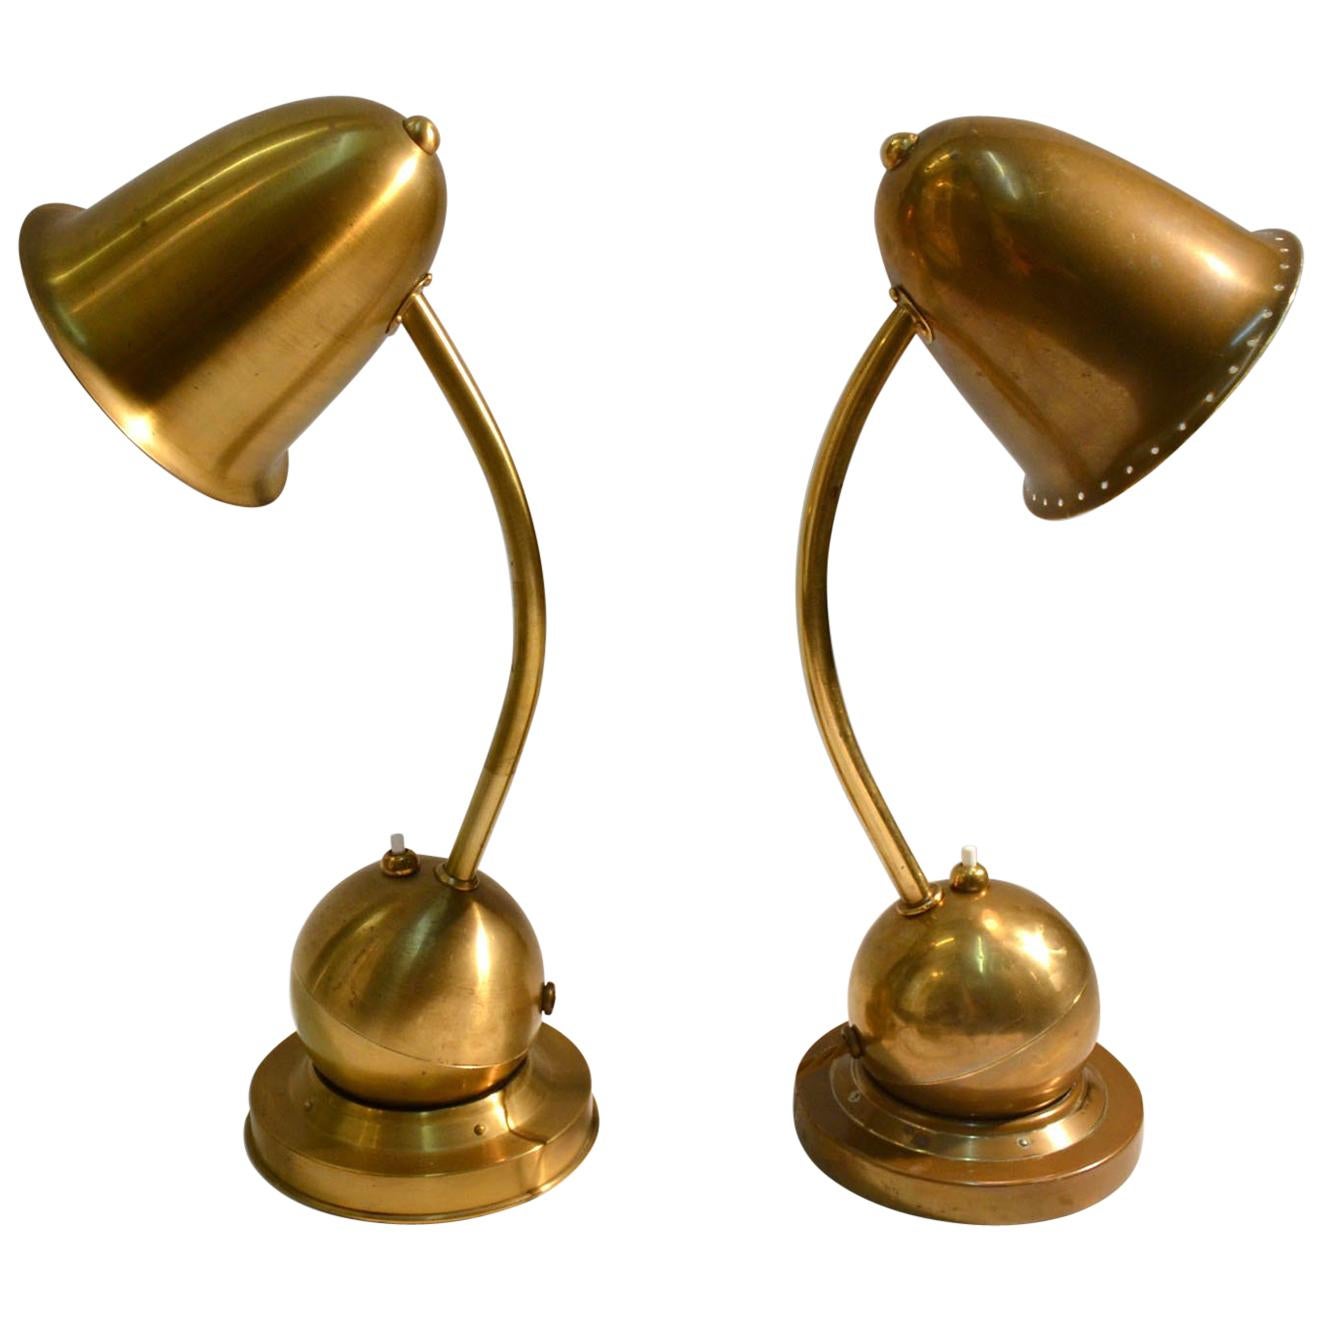 Pair of Modernist Brass Table / Desk Lamps 1930s Lamps by Daalderop Netherlands